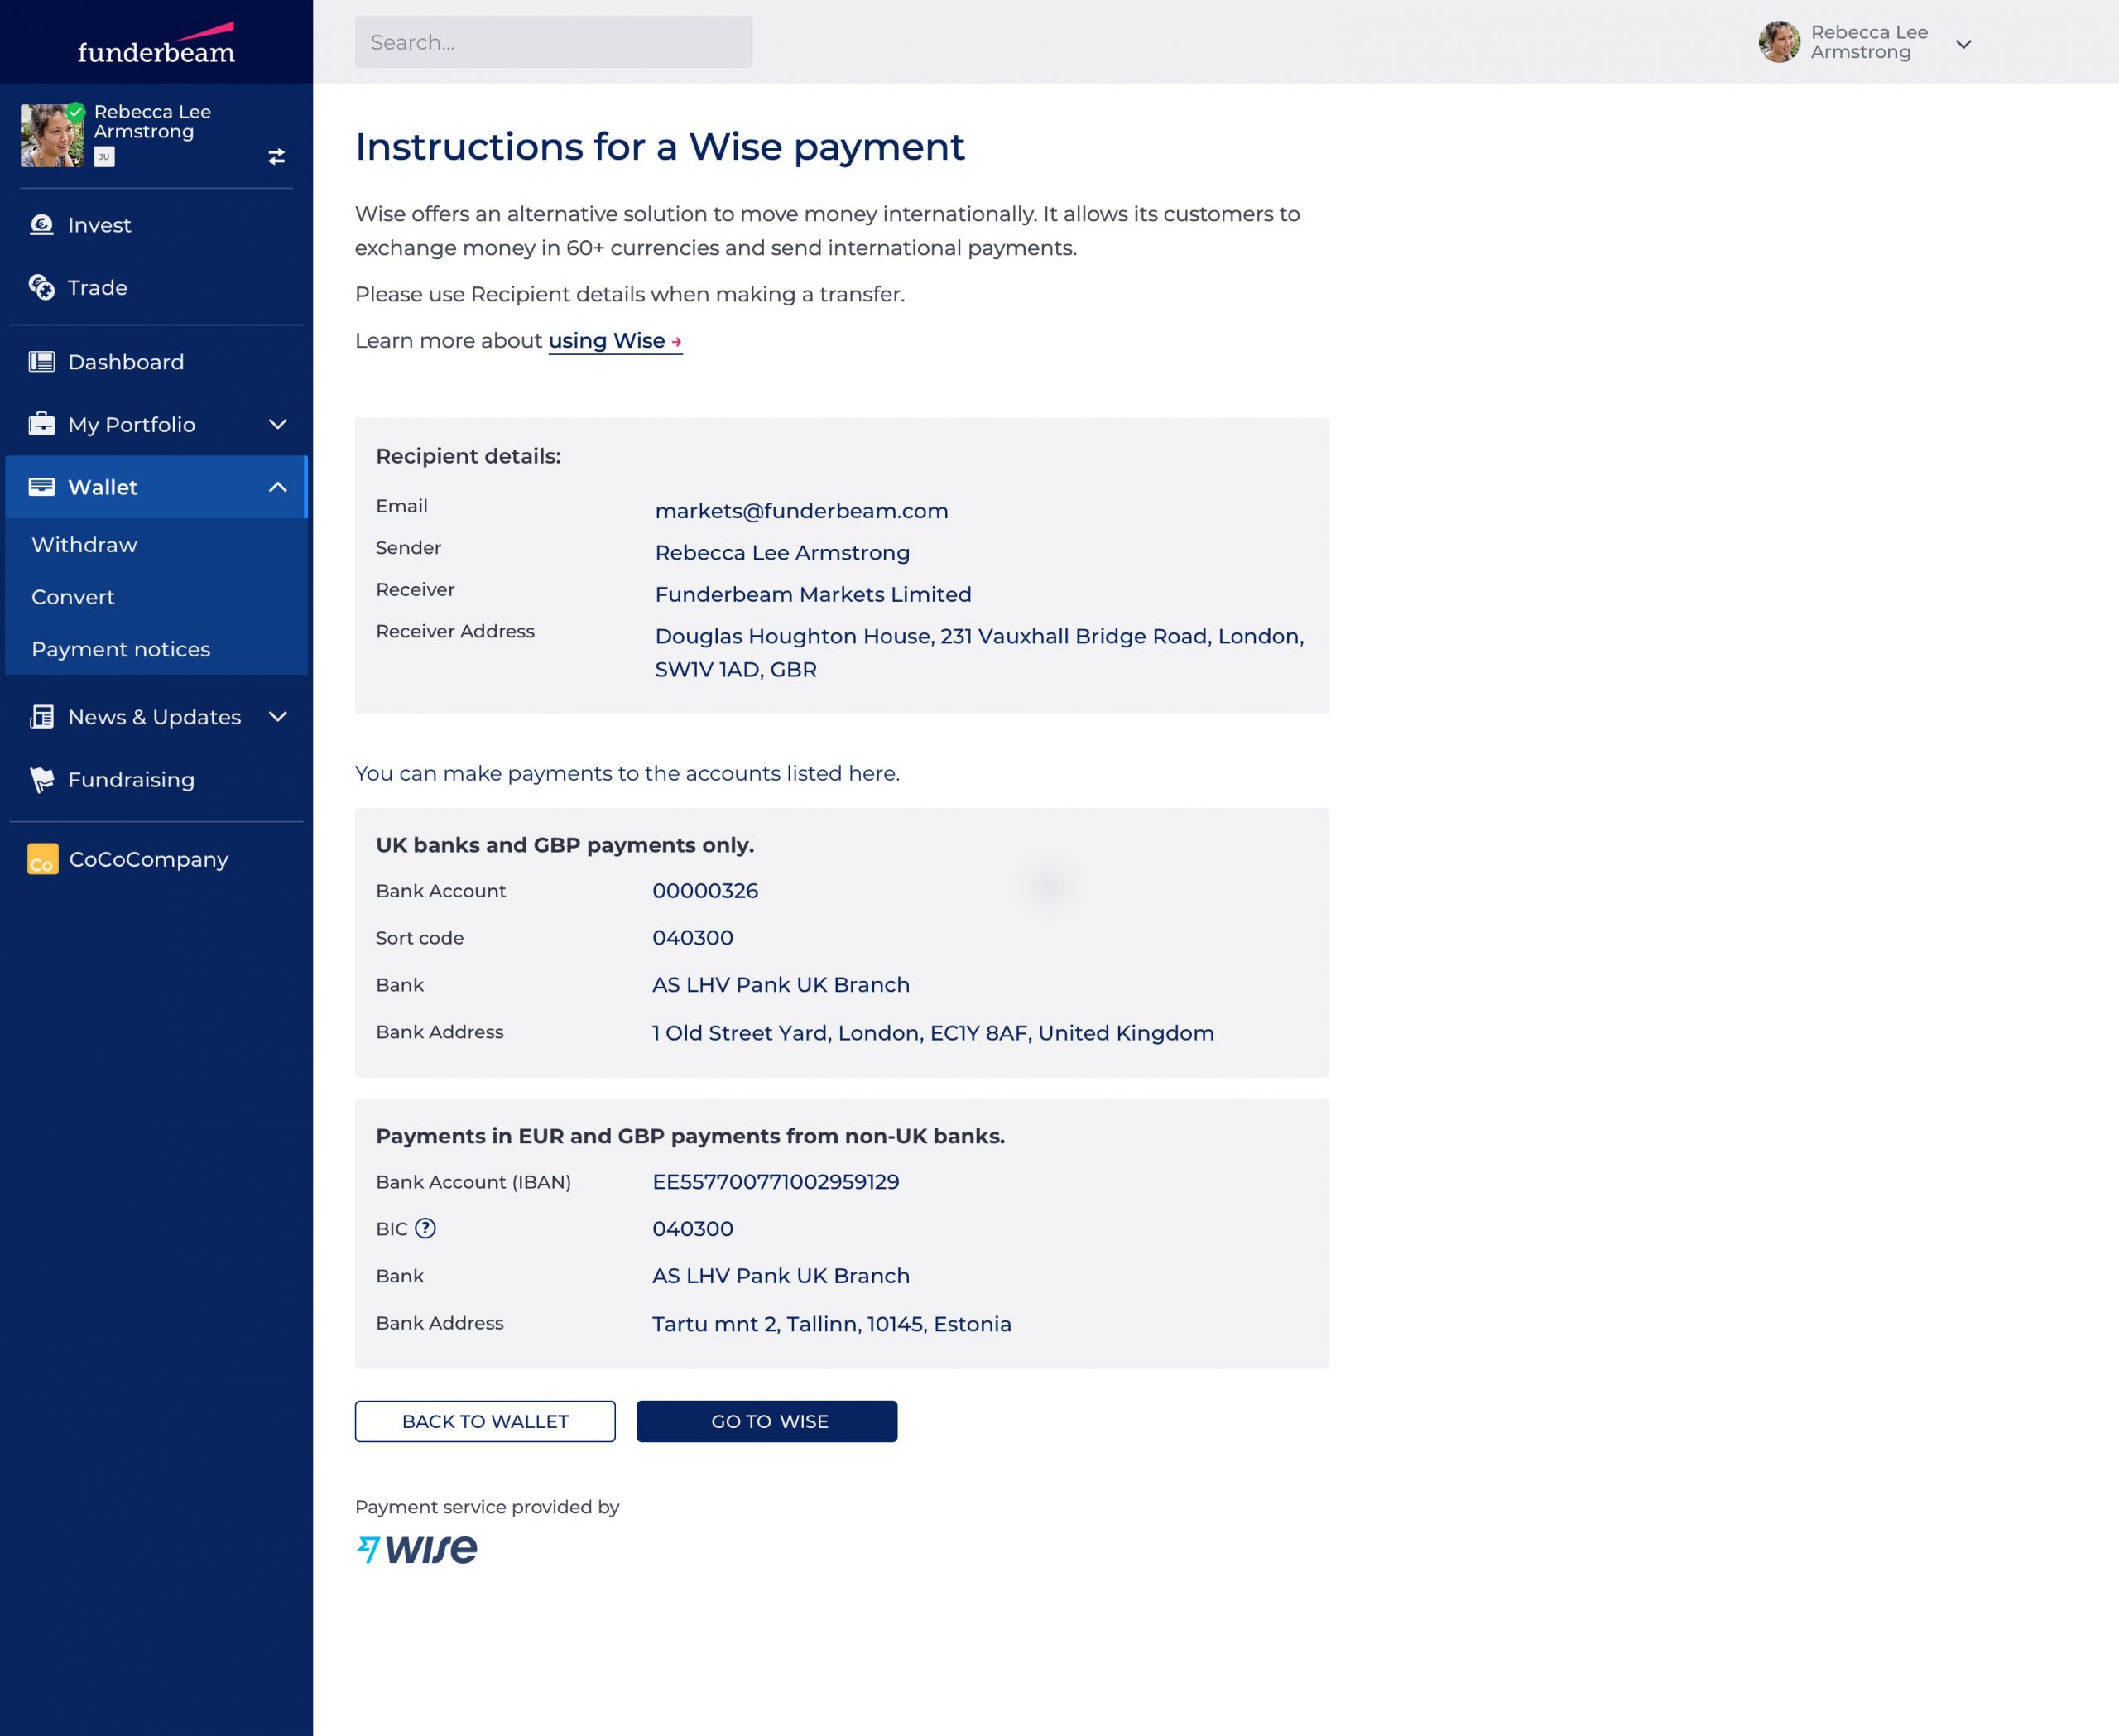 Wise payment information screen